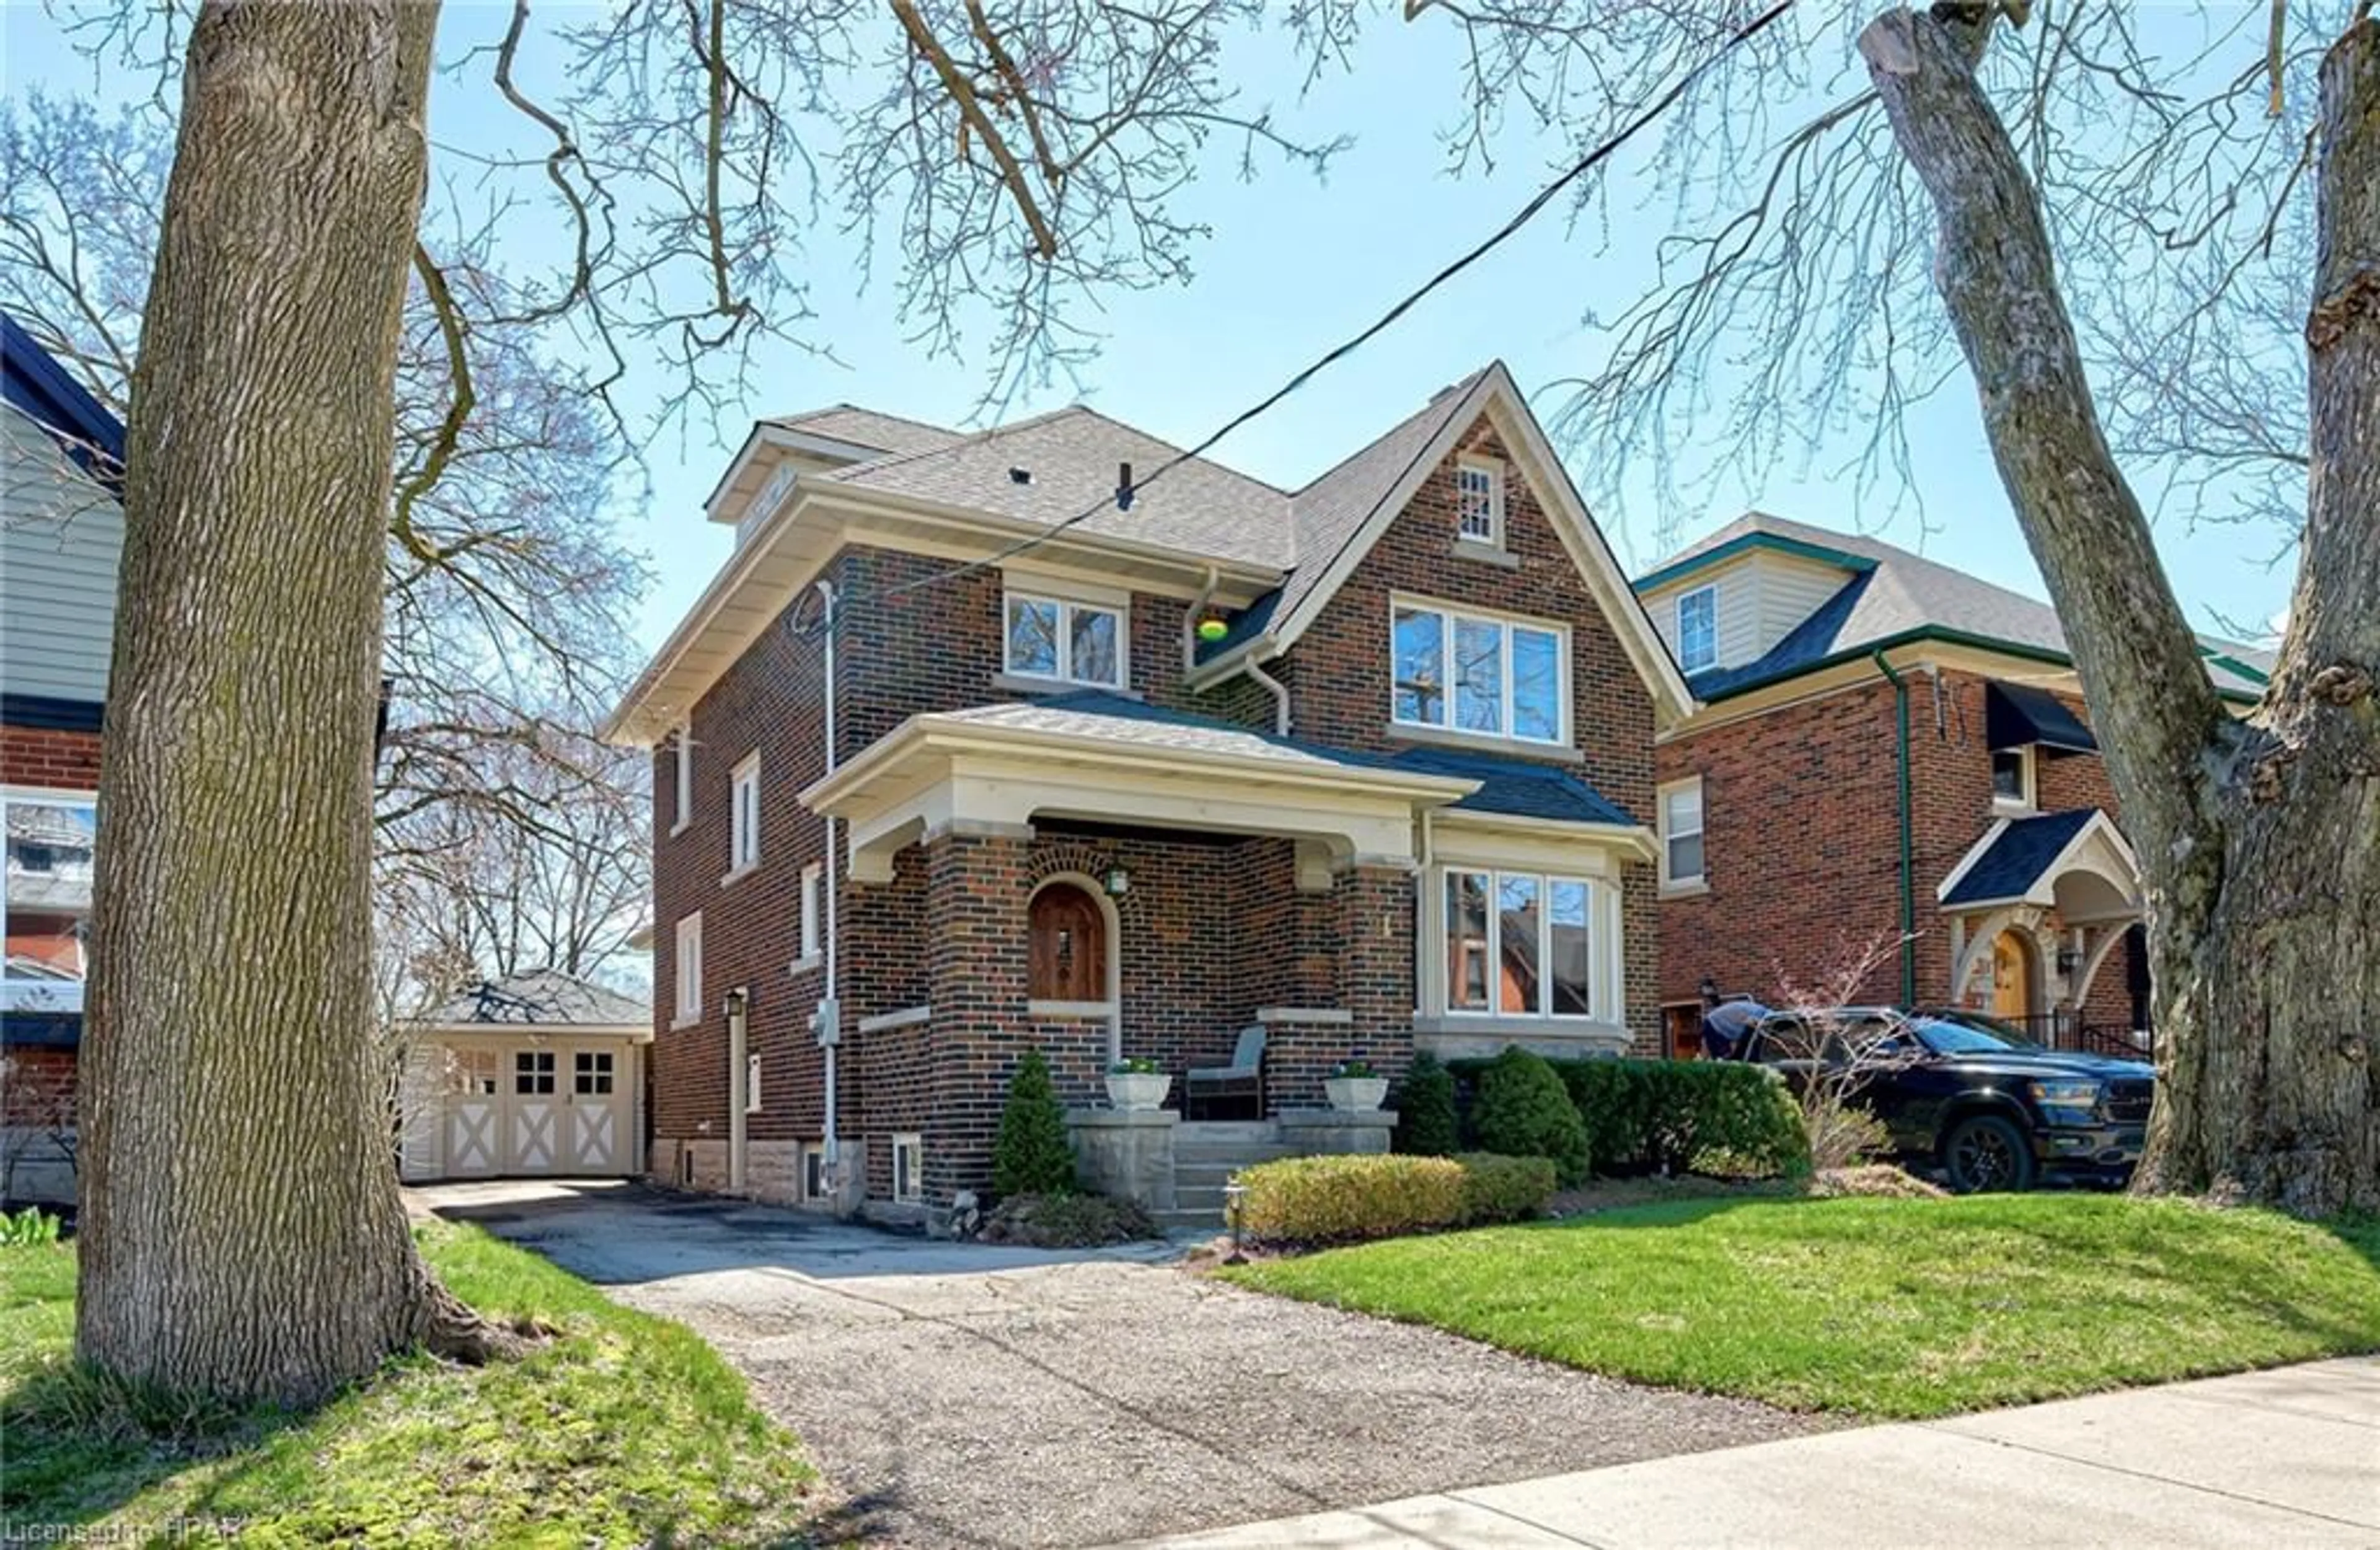 Home with brick exterior material for 91 Stirling Ave, Kitchener Ontario N2H 3G6